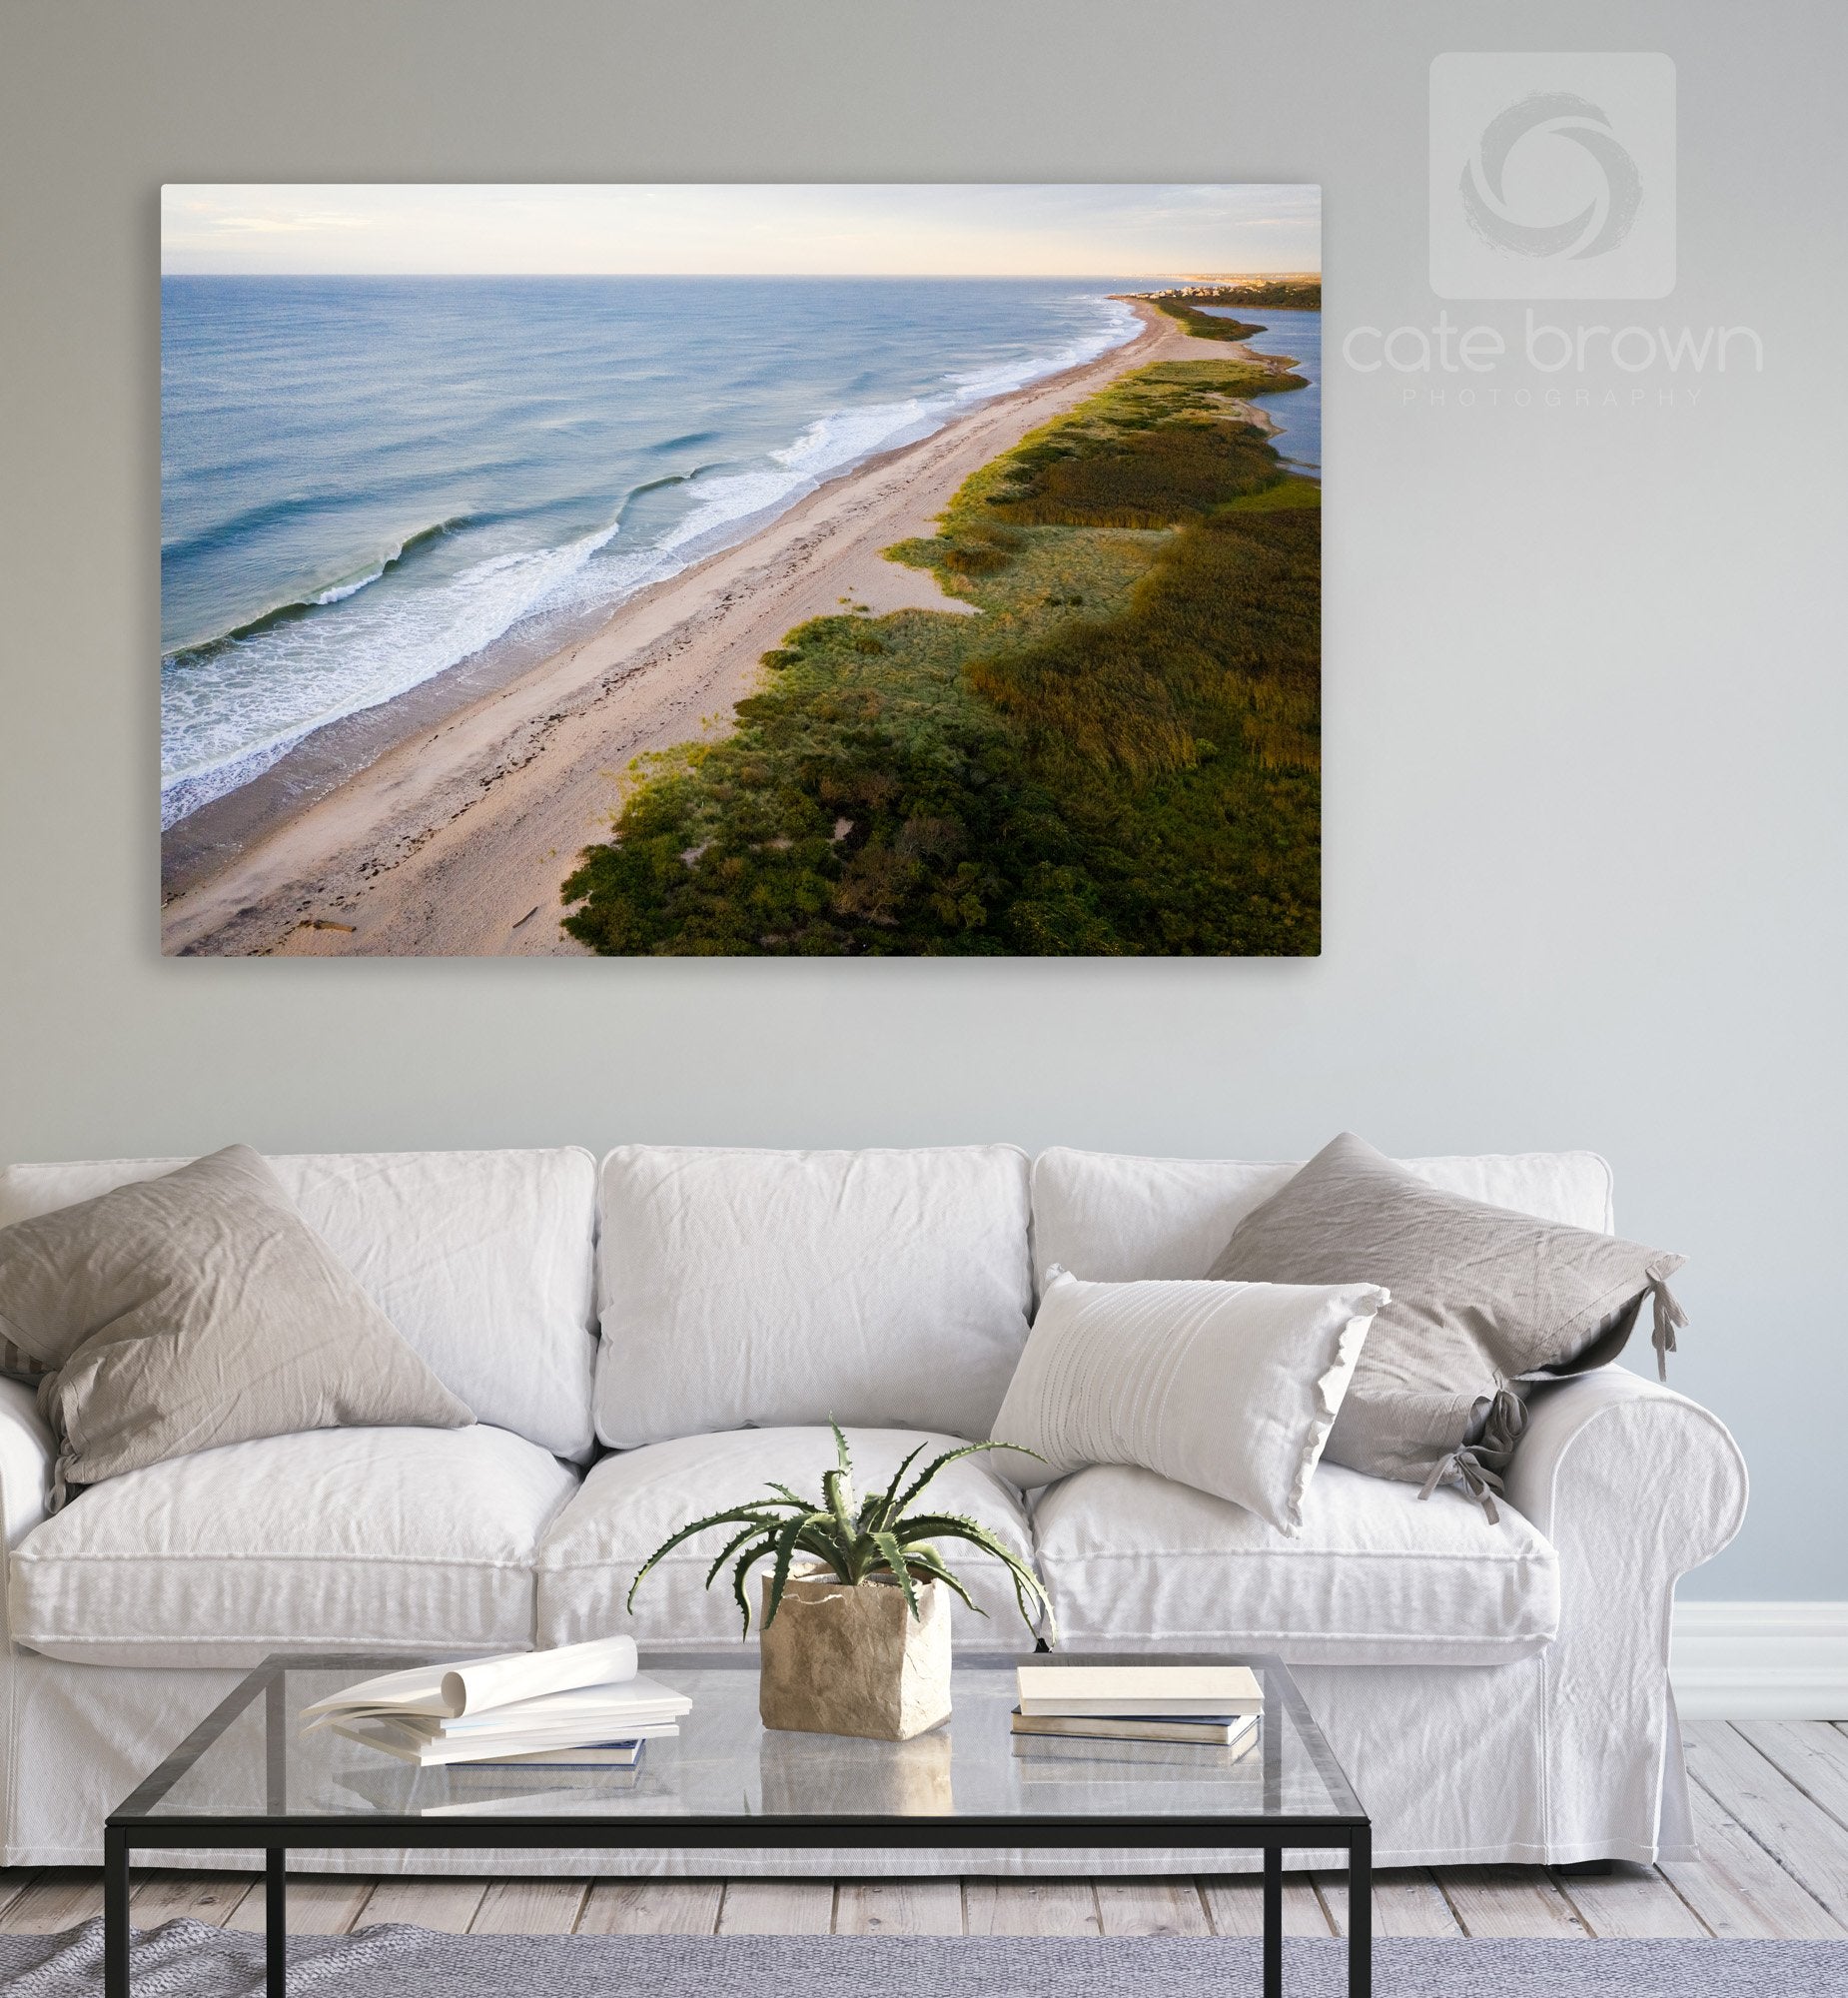 Cate Brown Photo Ocean View from Moonstone #3  //  Aerial Photography Made to Order Ocean Fine Art